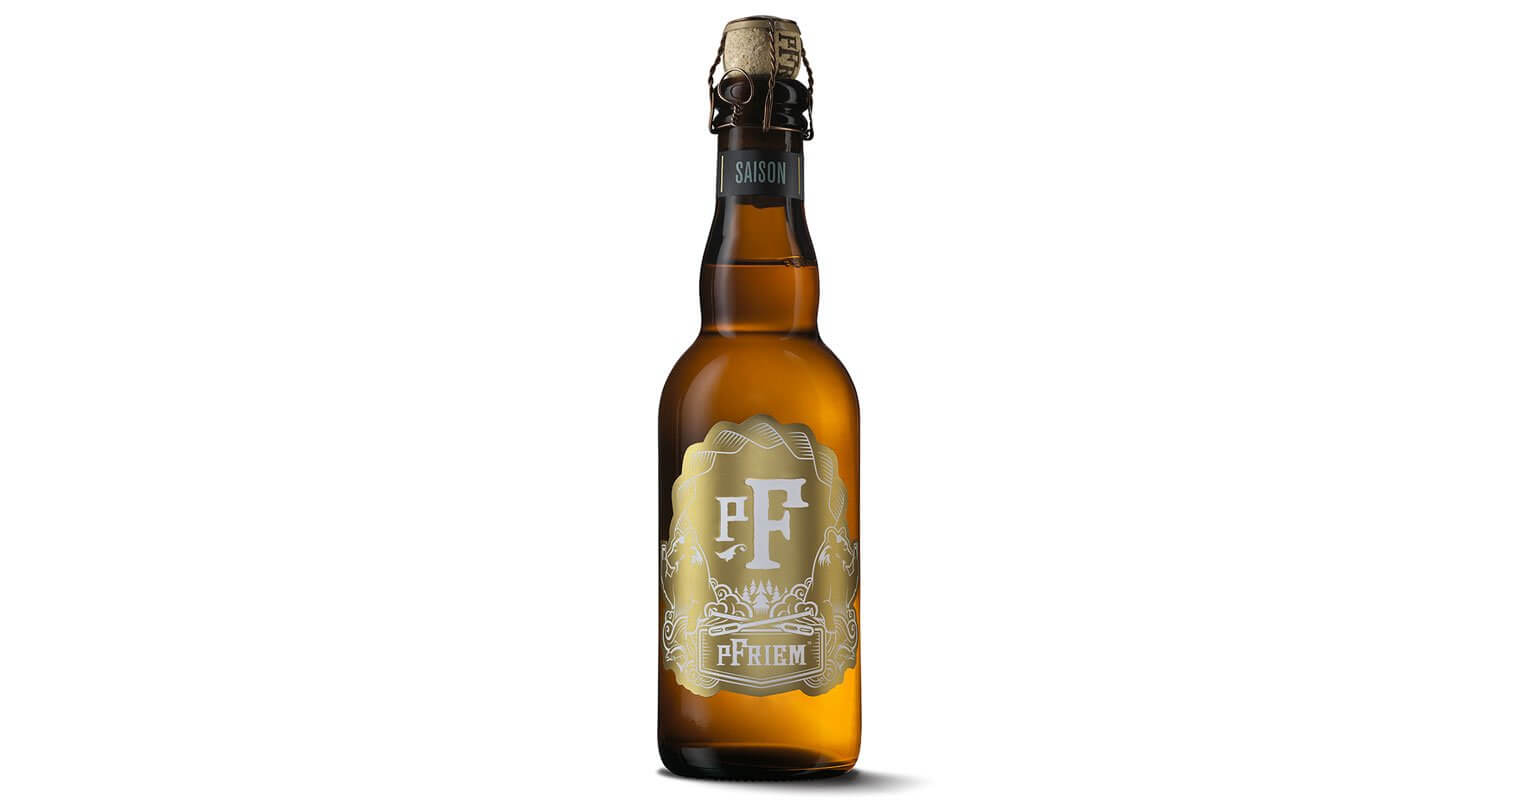 pFriem Family Brewers Saison, bottle on white, featured image